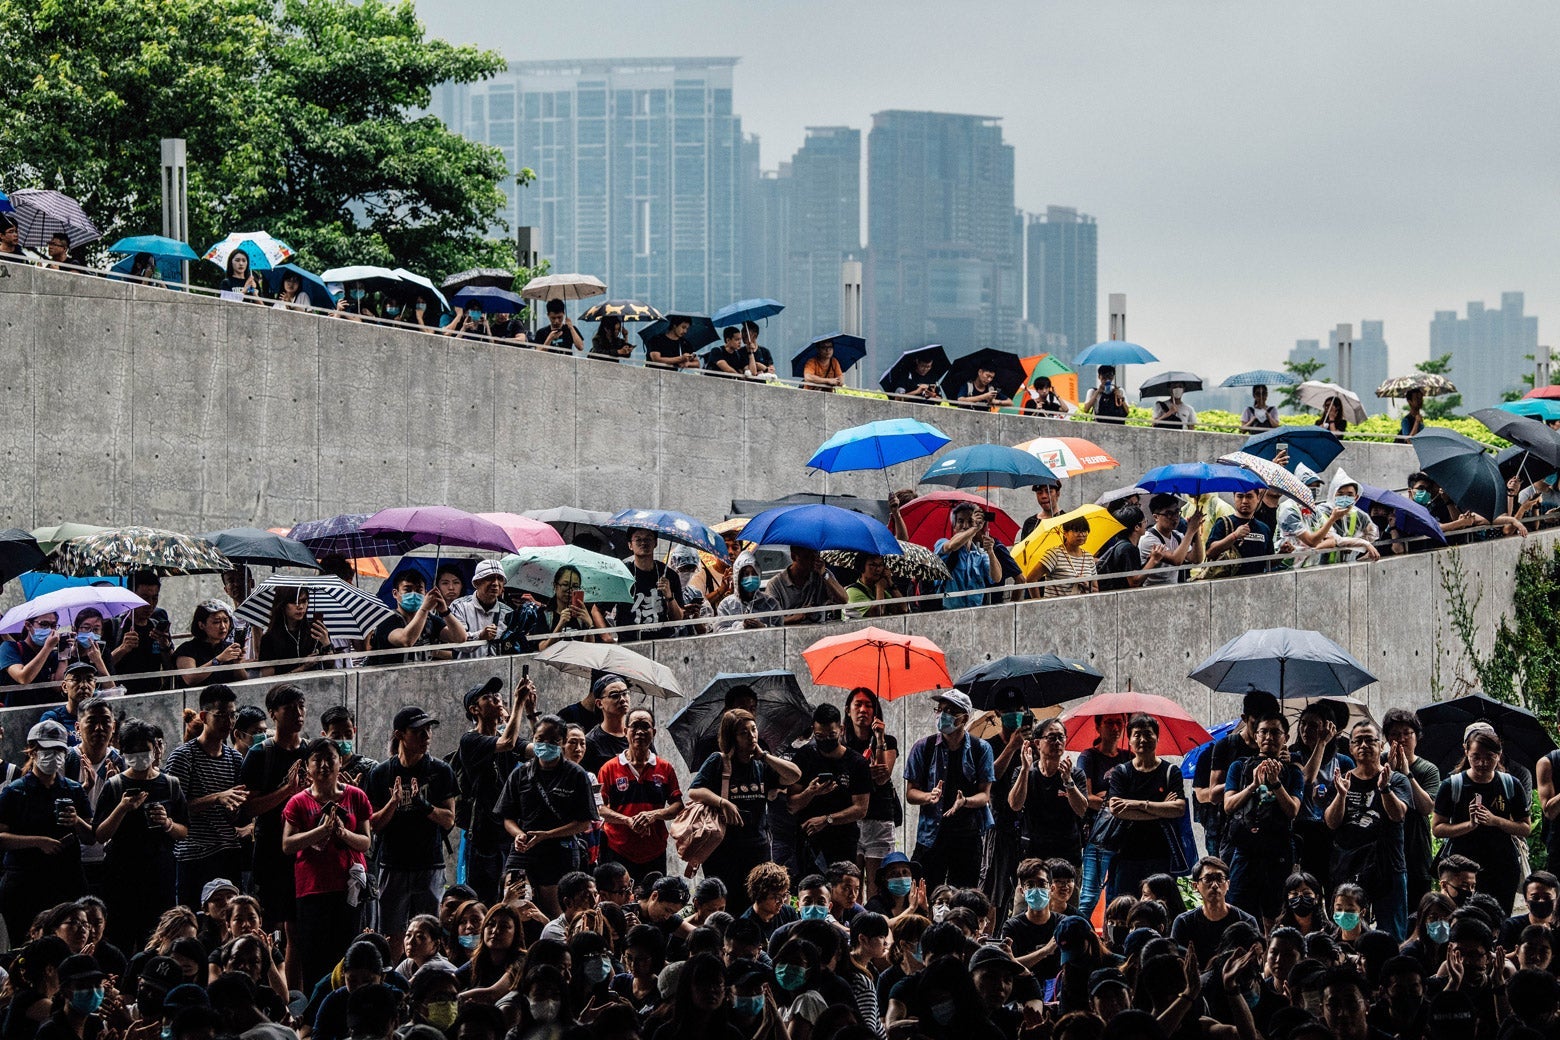 Protesters gather near the Legislative Council building ahead of the arrival of pro-democracy activist Joshua Wong who was earlier released from prison, on June 17, 2019 in Hong Kong, Hong Kong. Hong Kong pro-democracy activist, Joshua Wong, said on Monday after being released from jail that Chief Executive Carrie Lam must step down as he joined protesters against the controversial extradition bill which would allow suspected criminals to be sent to the mainland and place its citizens at risk of extradition to China. (Photo by Carl Court/Getty Images)